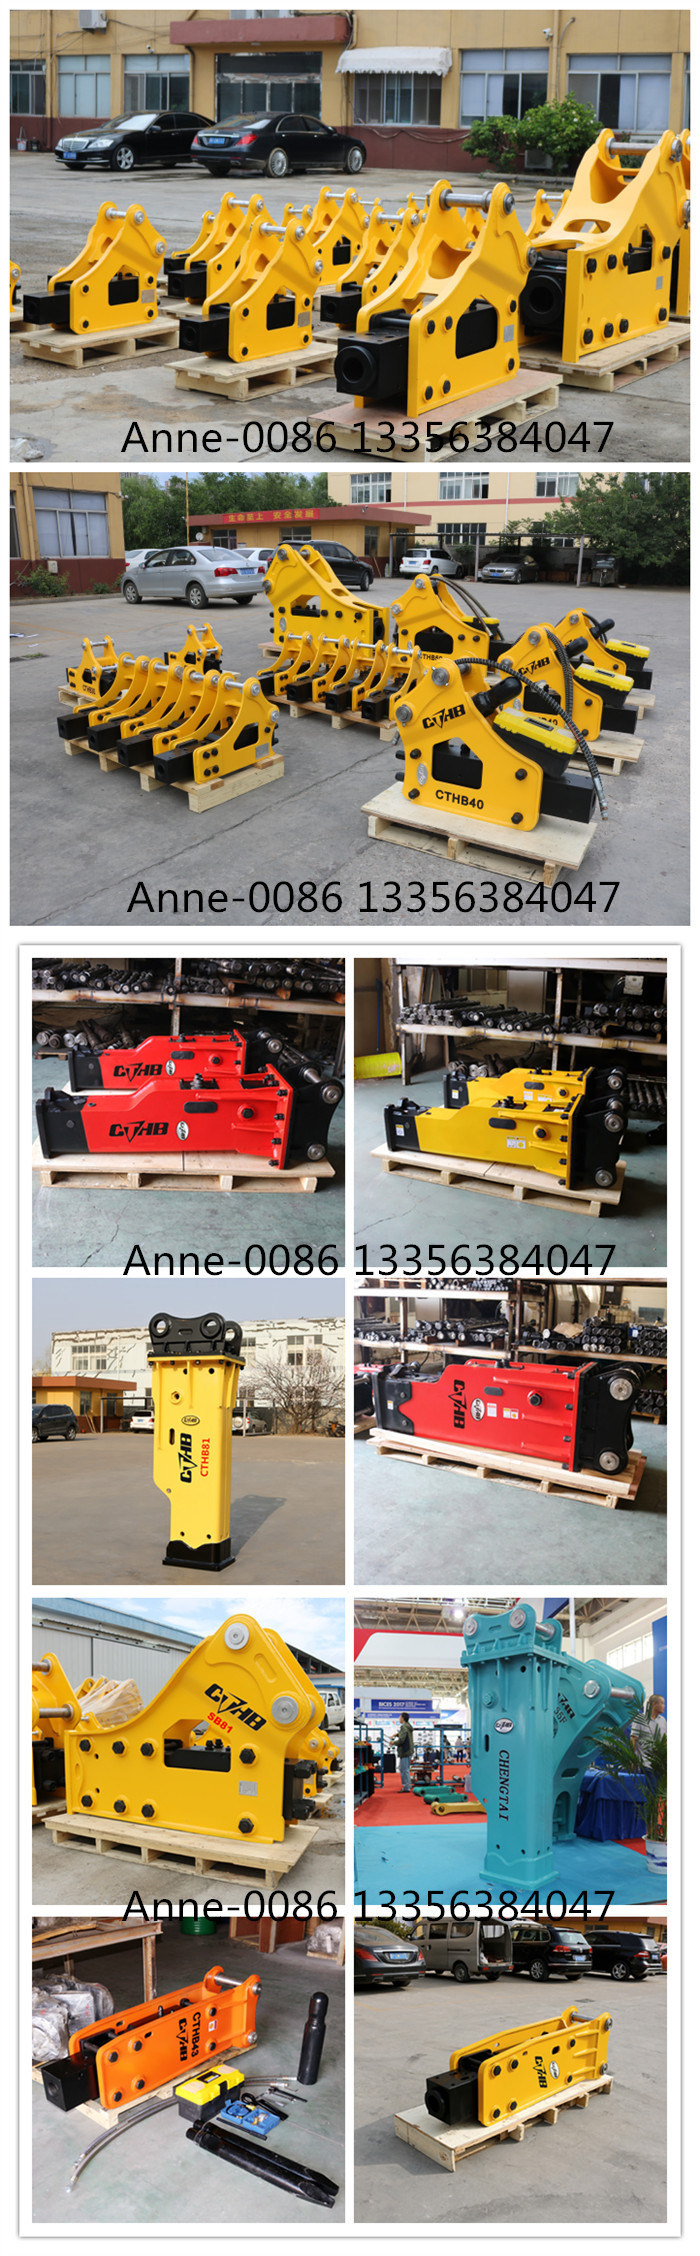 Mini Hydraulic Breaker for Concrete/Road and Indoor Construction Demolition Working Used on 1ton 2ton Excavator